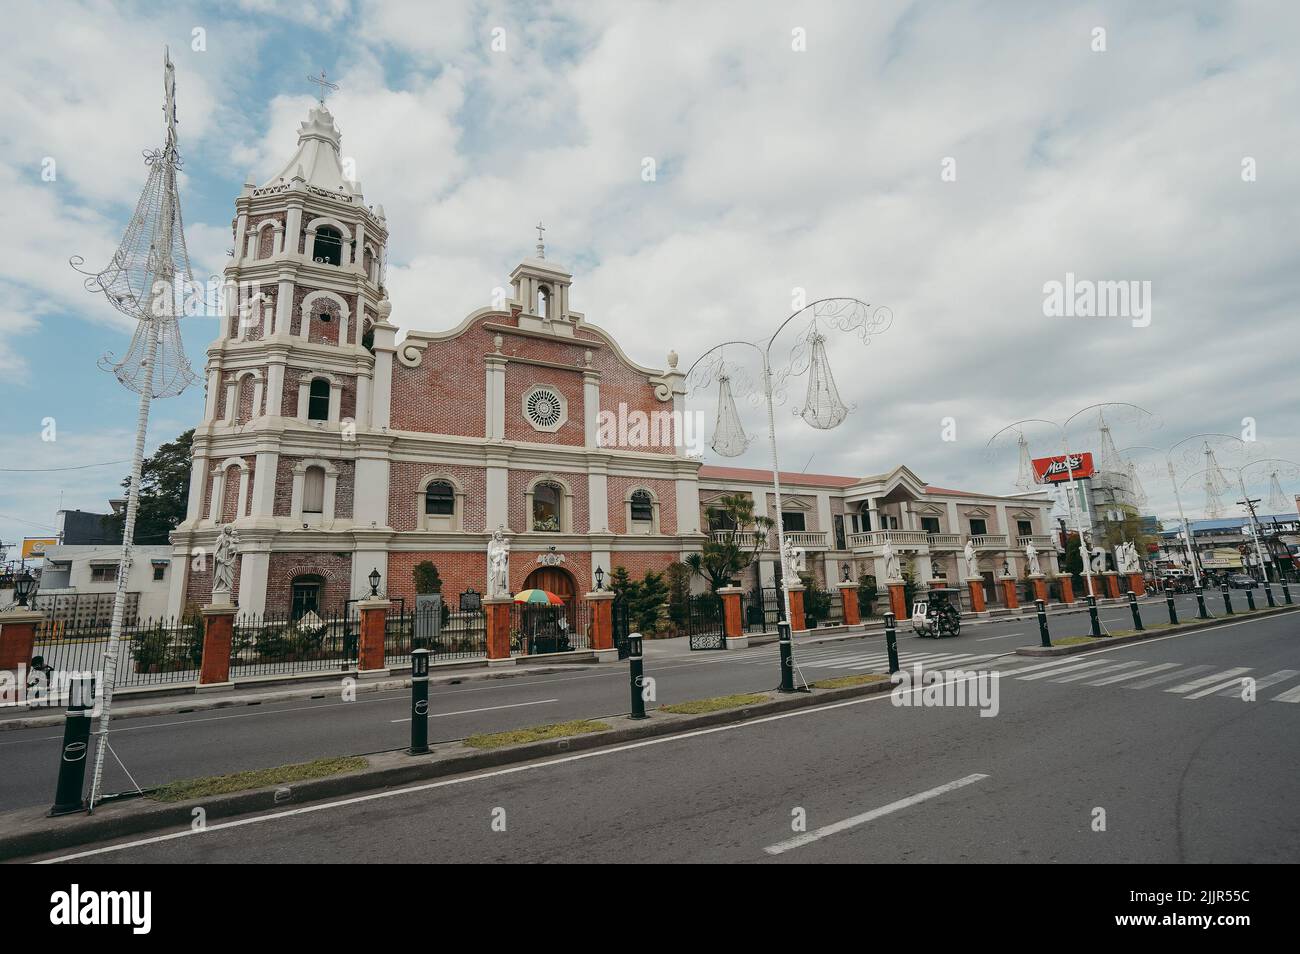 A building of the Balanga Cathedral in the empty city center of Balanga, Philippines Stock Photo